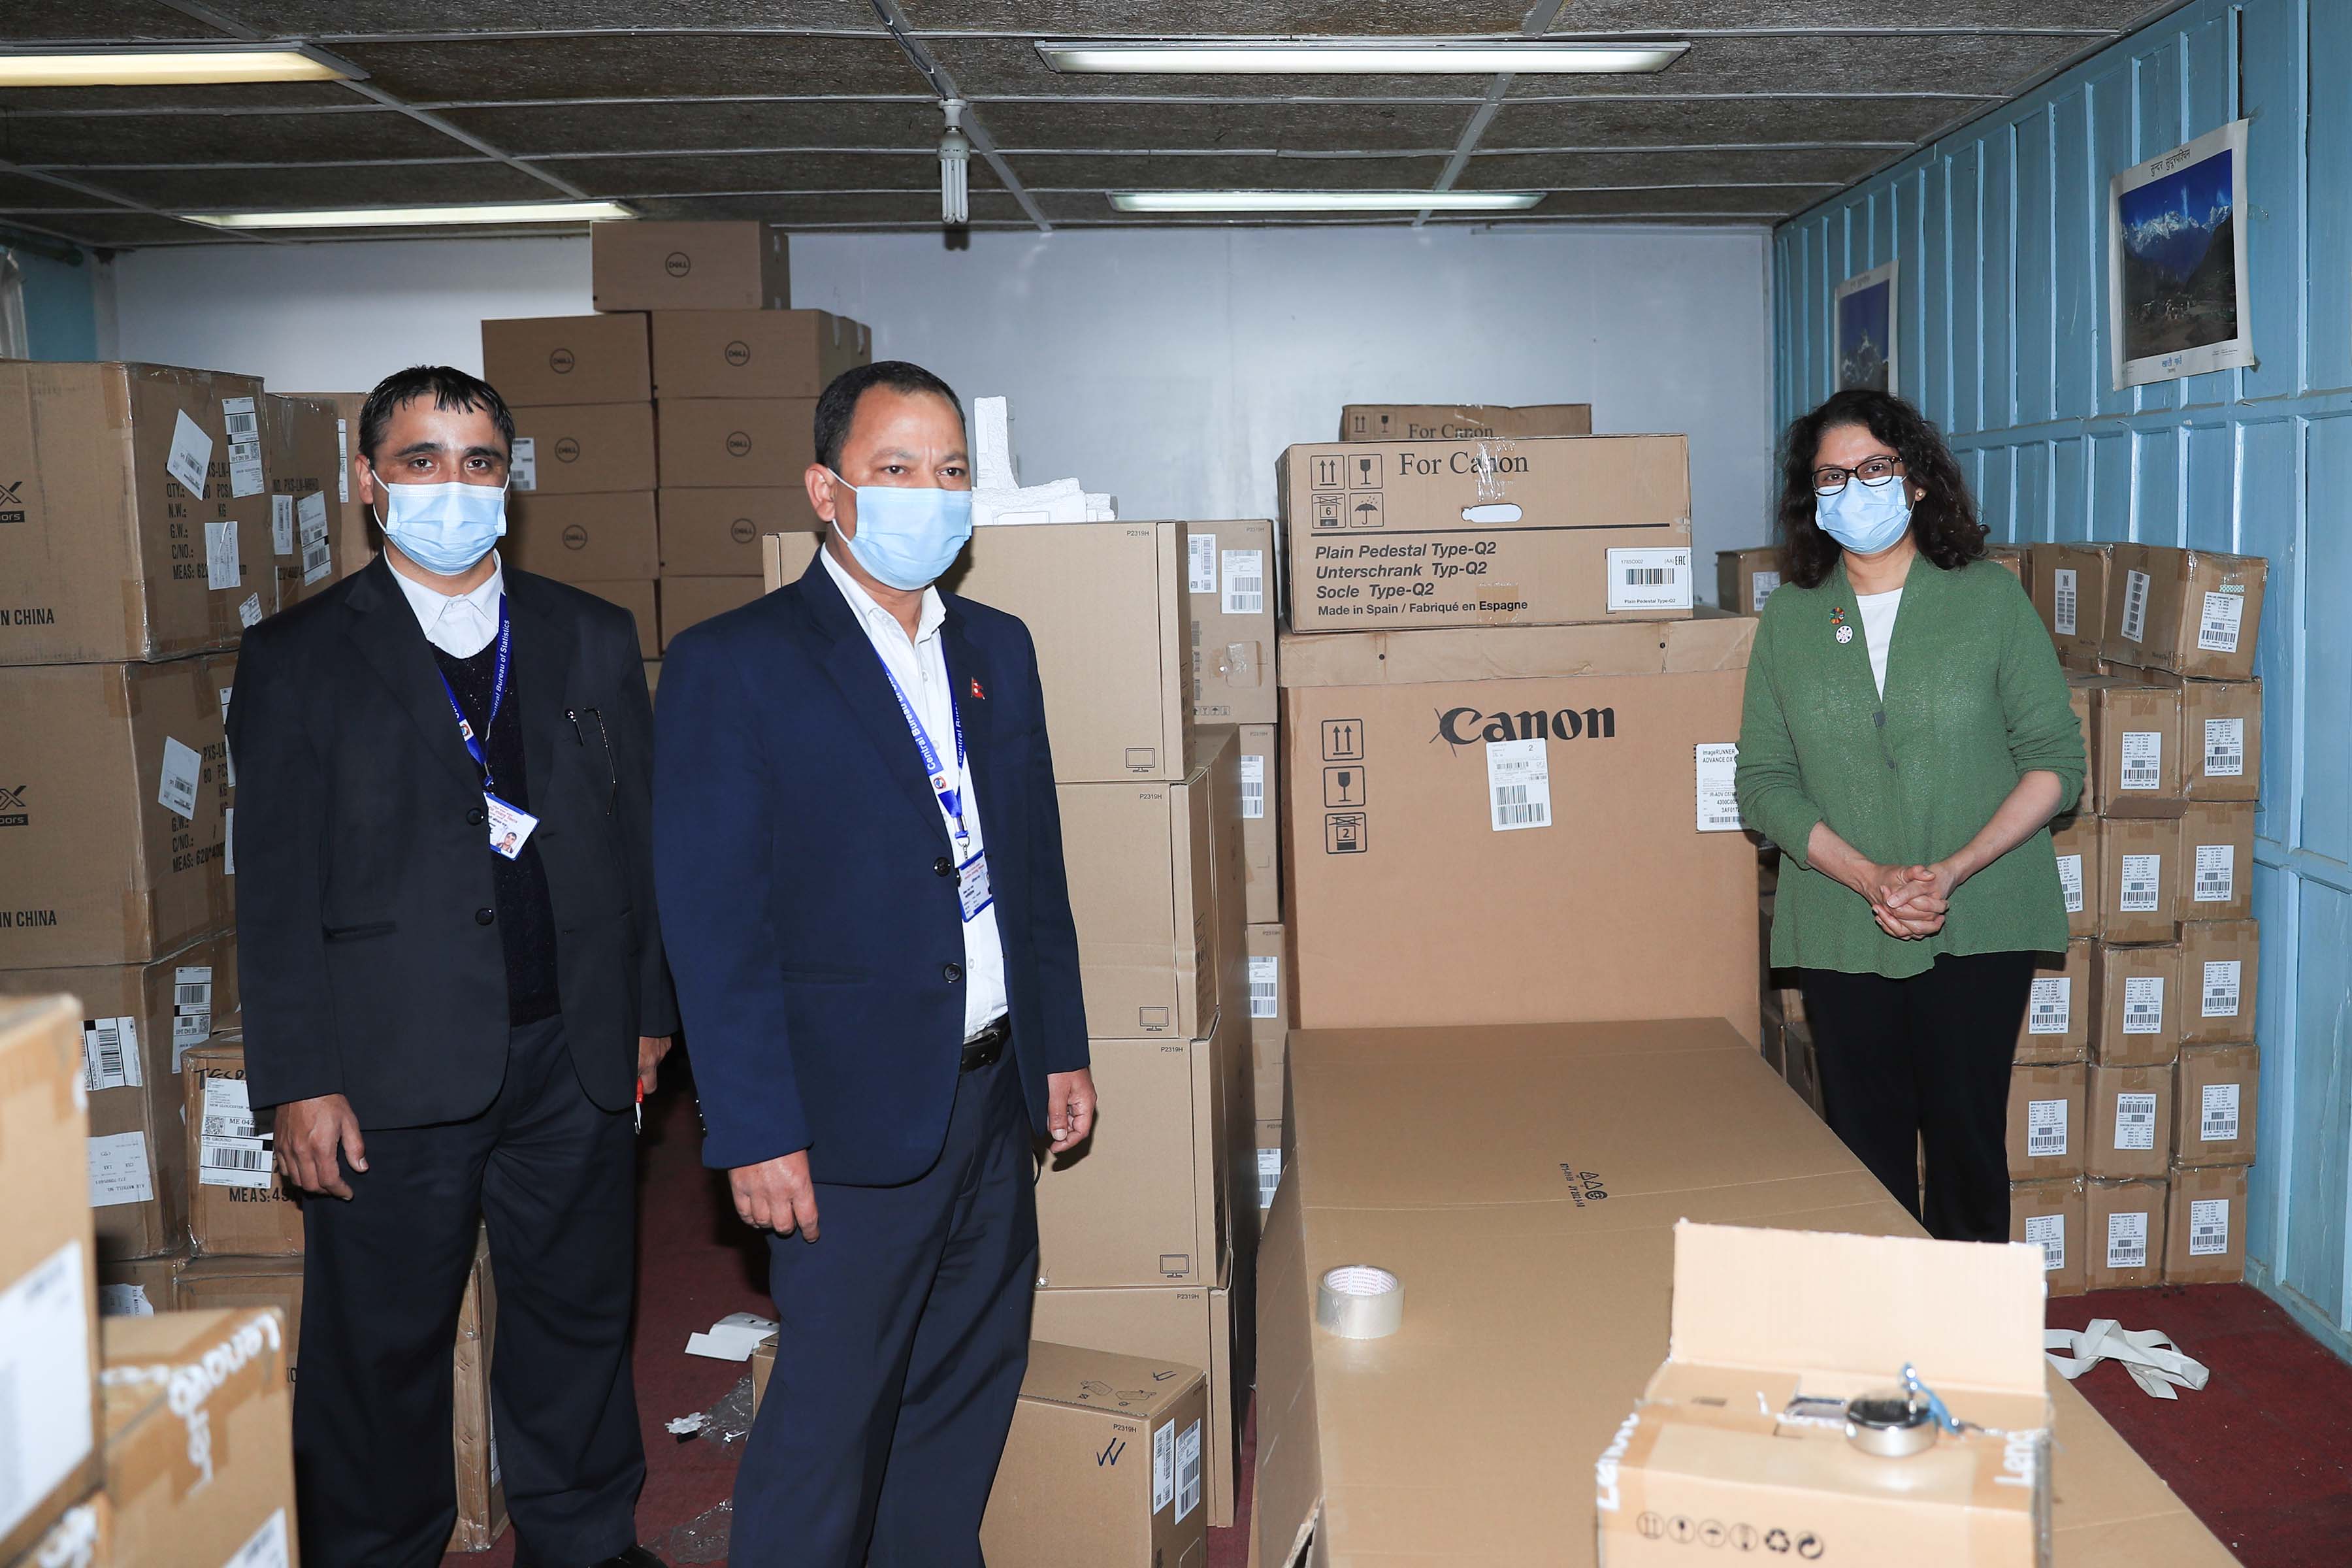 UNFPA and UK government handover IT equipment to Nepal’s Central Bureau of Statistics